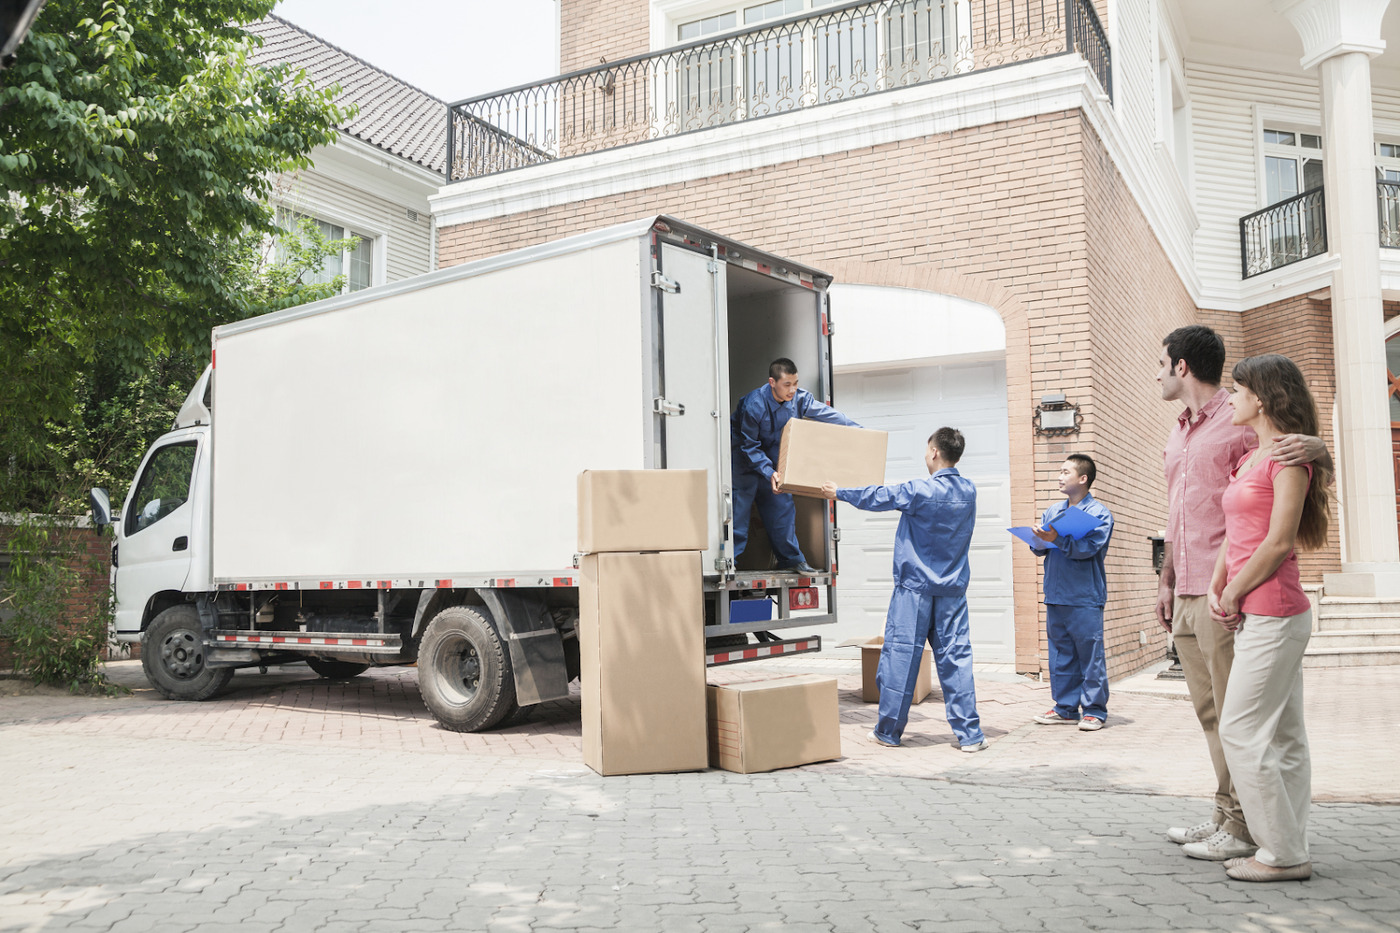 Mover Pros has been providing professional moving services in the San Francisco Bay Area for 24 years now.